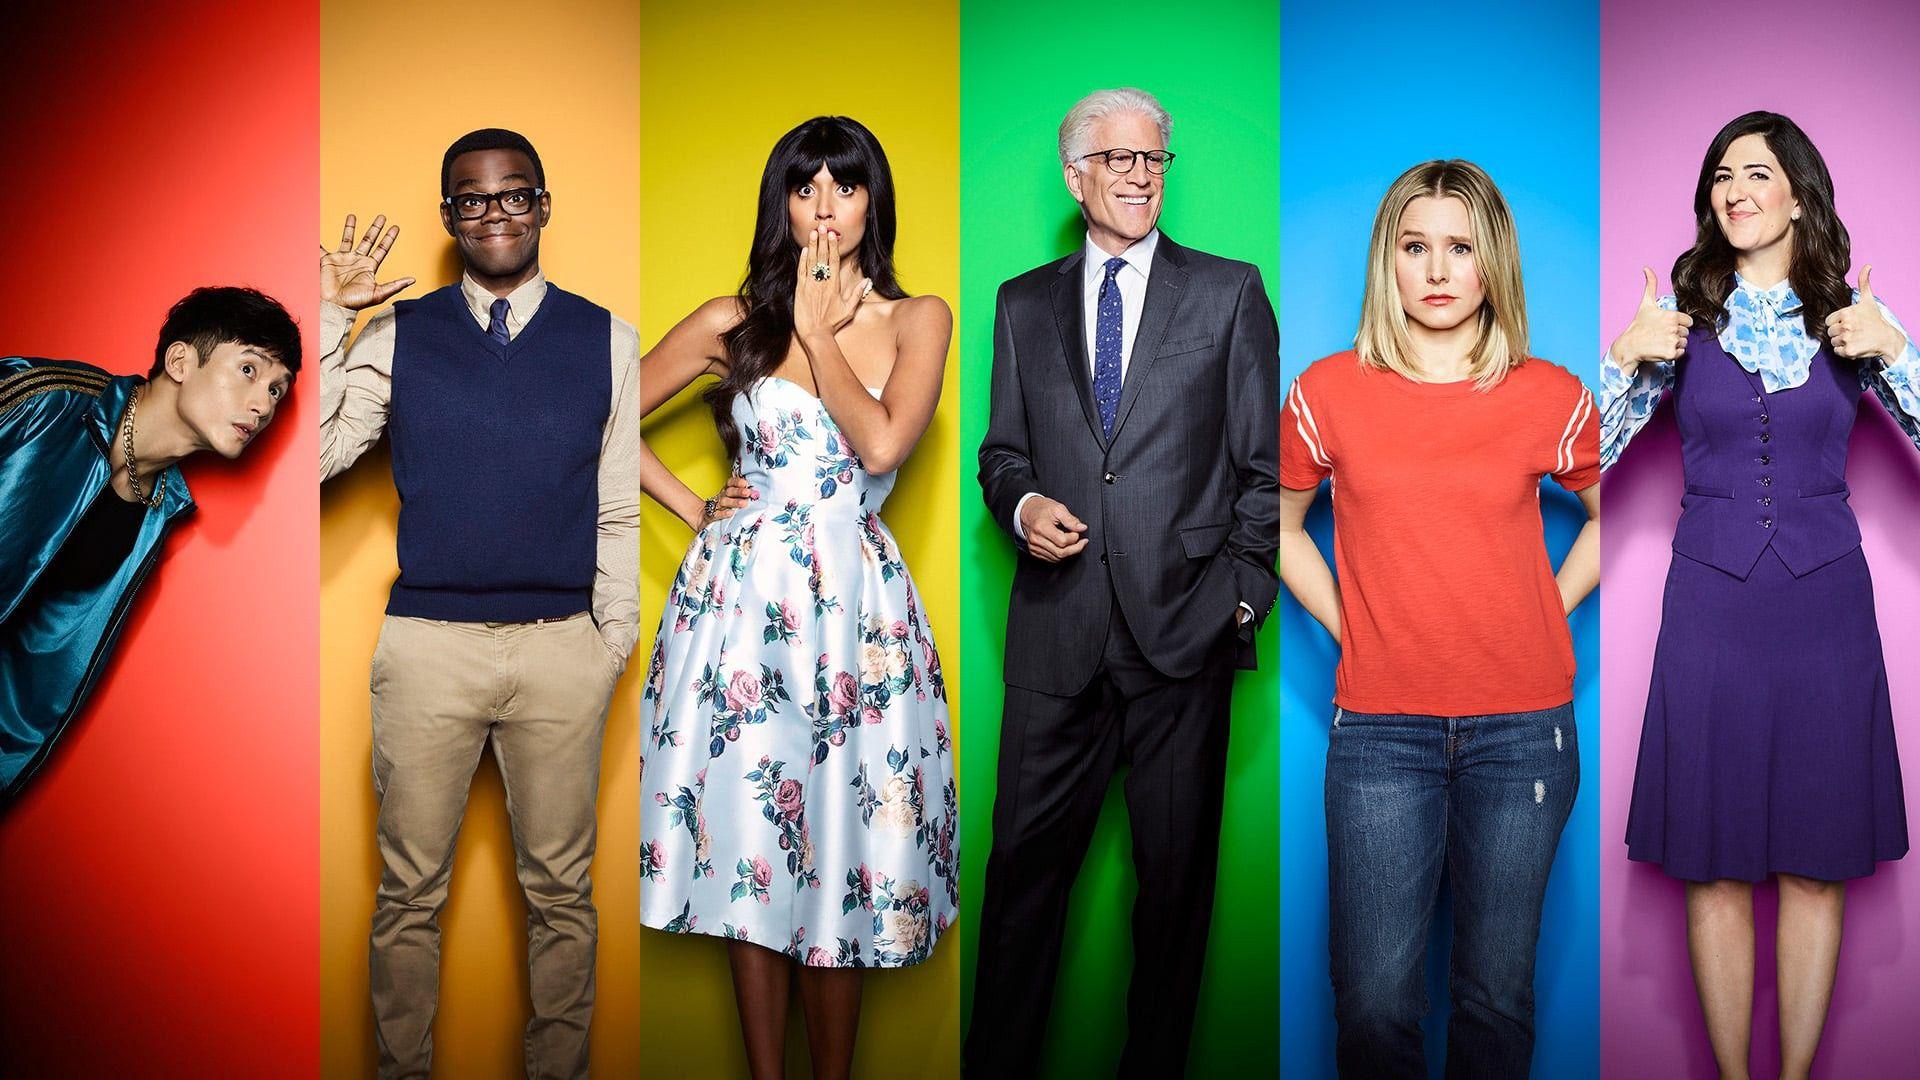 The Good Place Wallpapers - Top Free The Good Place Backgrounds